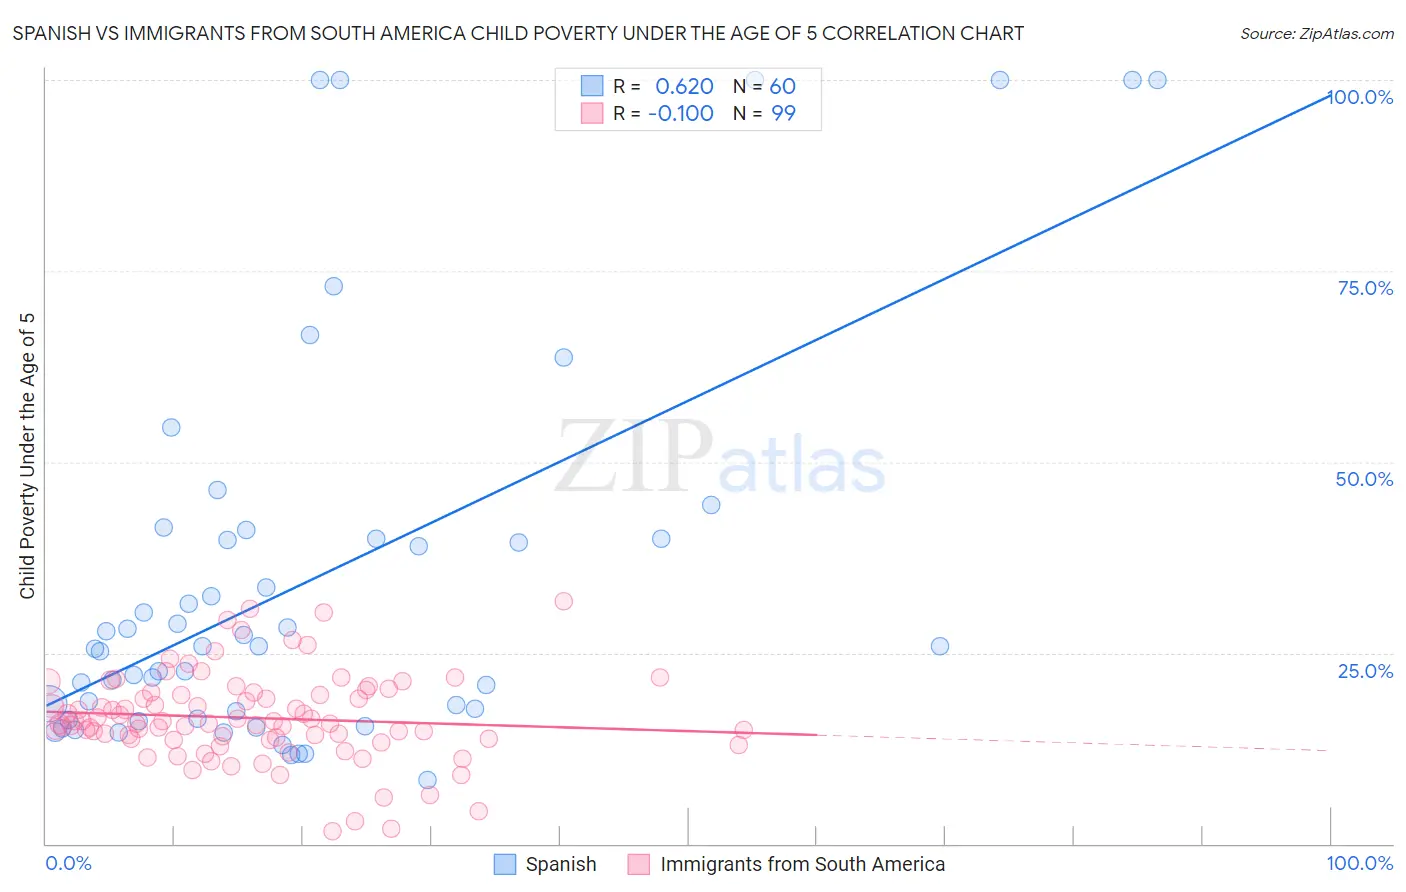 Spanish vs Immigrants from South America Child Poverty Under the Age of 5